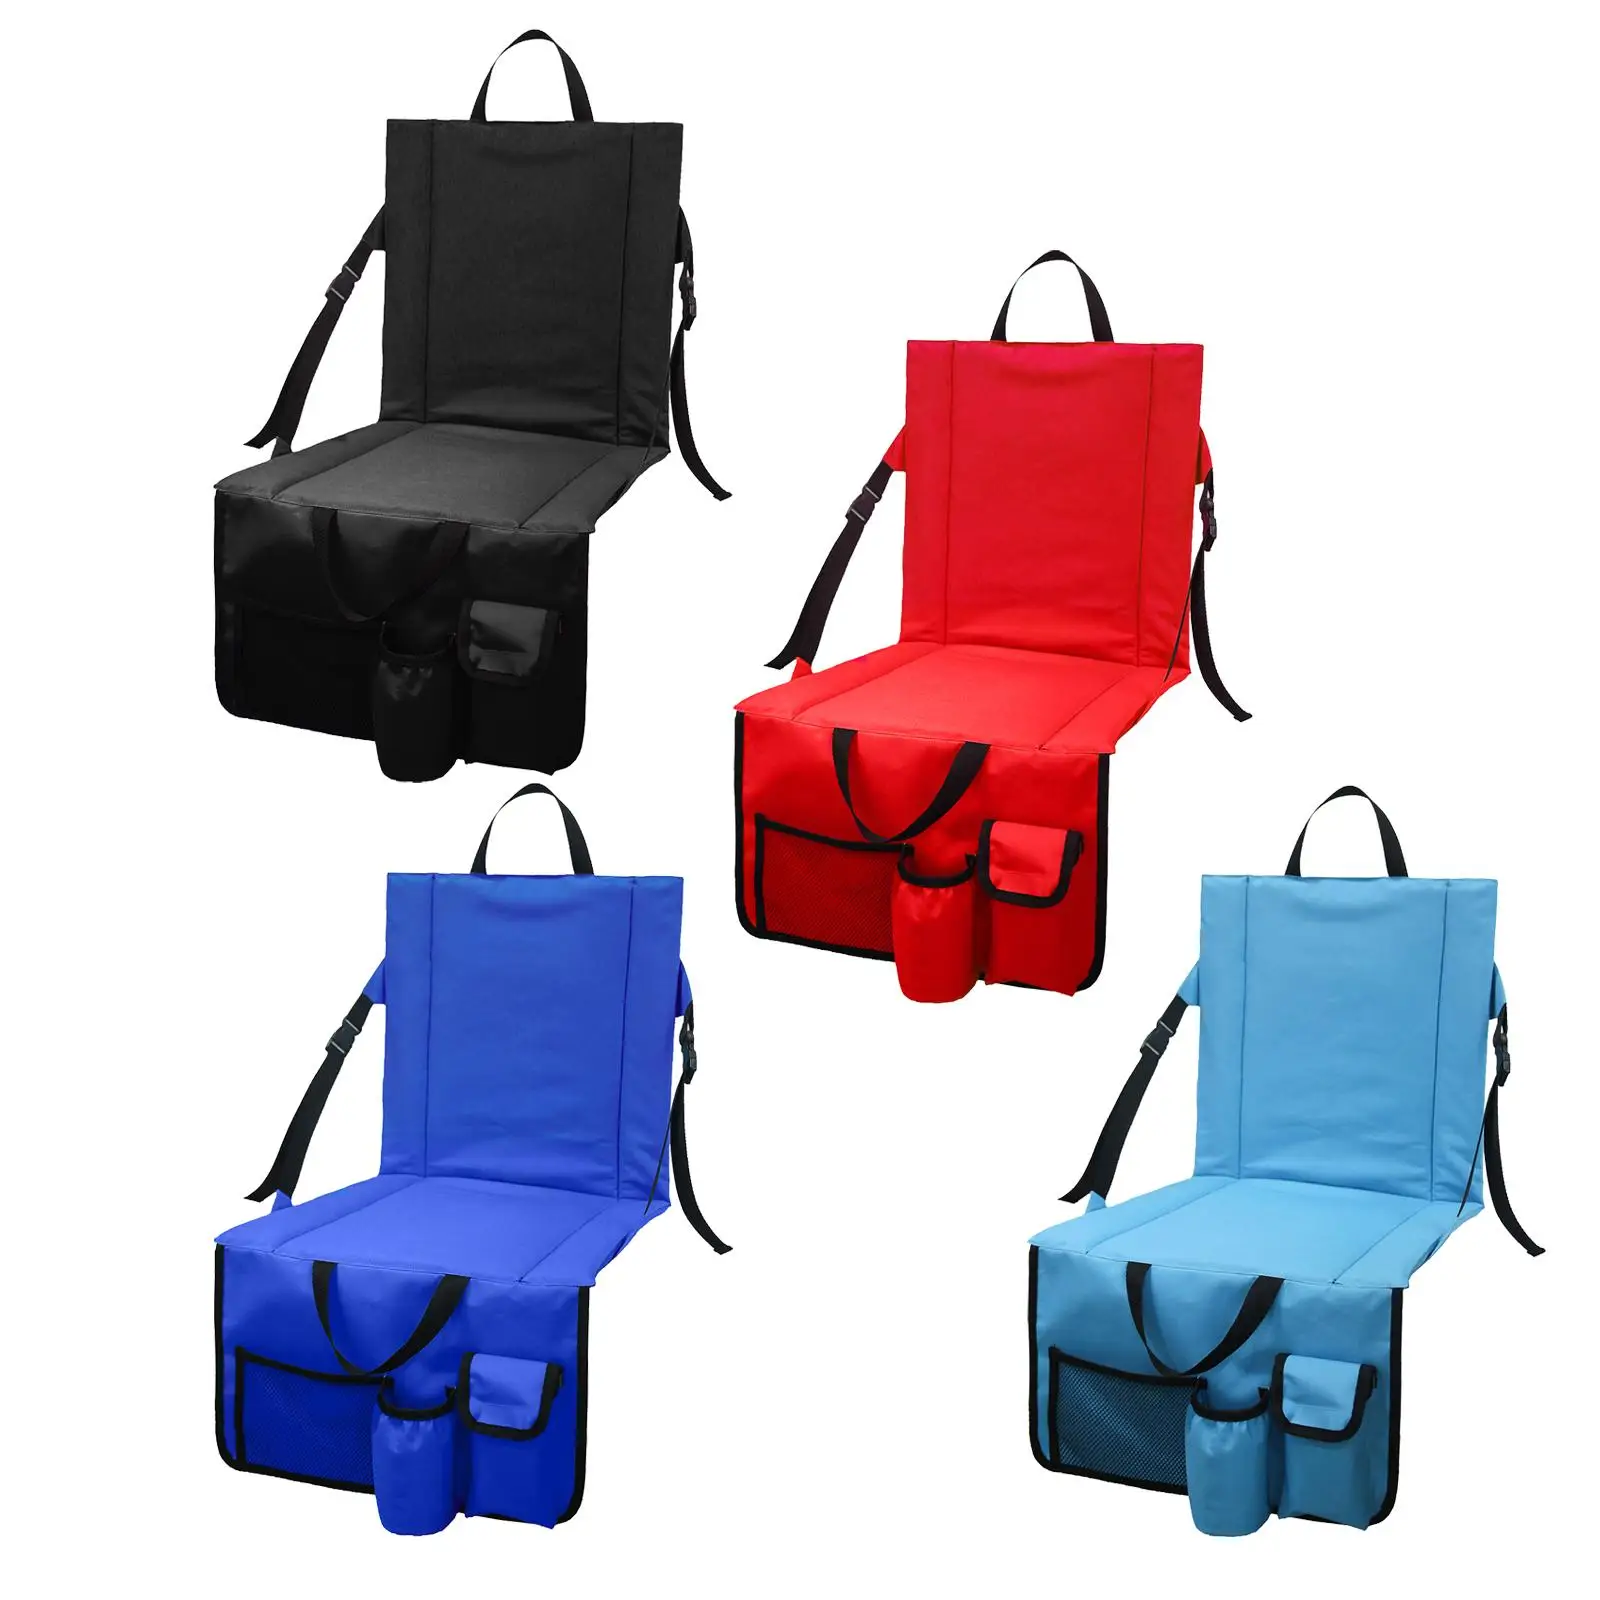 Foldable Stadium Chair Camping Seat Cushion Outdoor Lightweight Travel